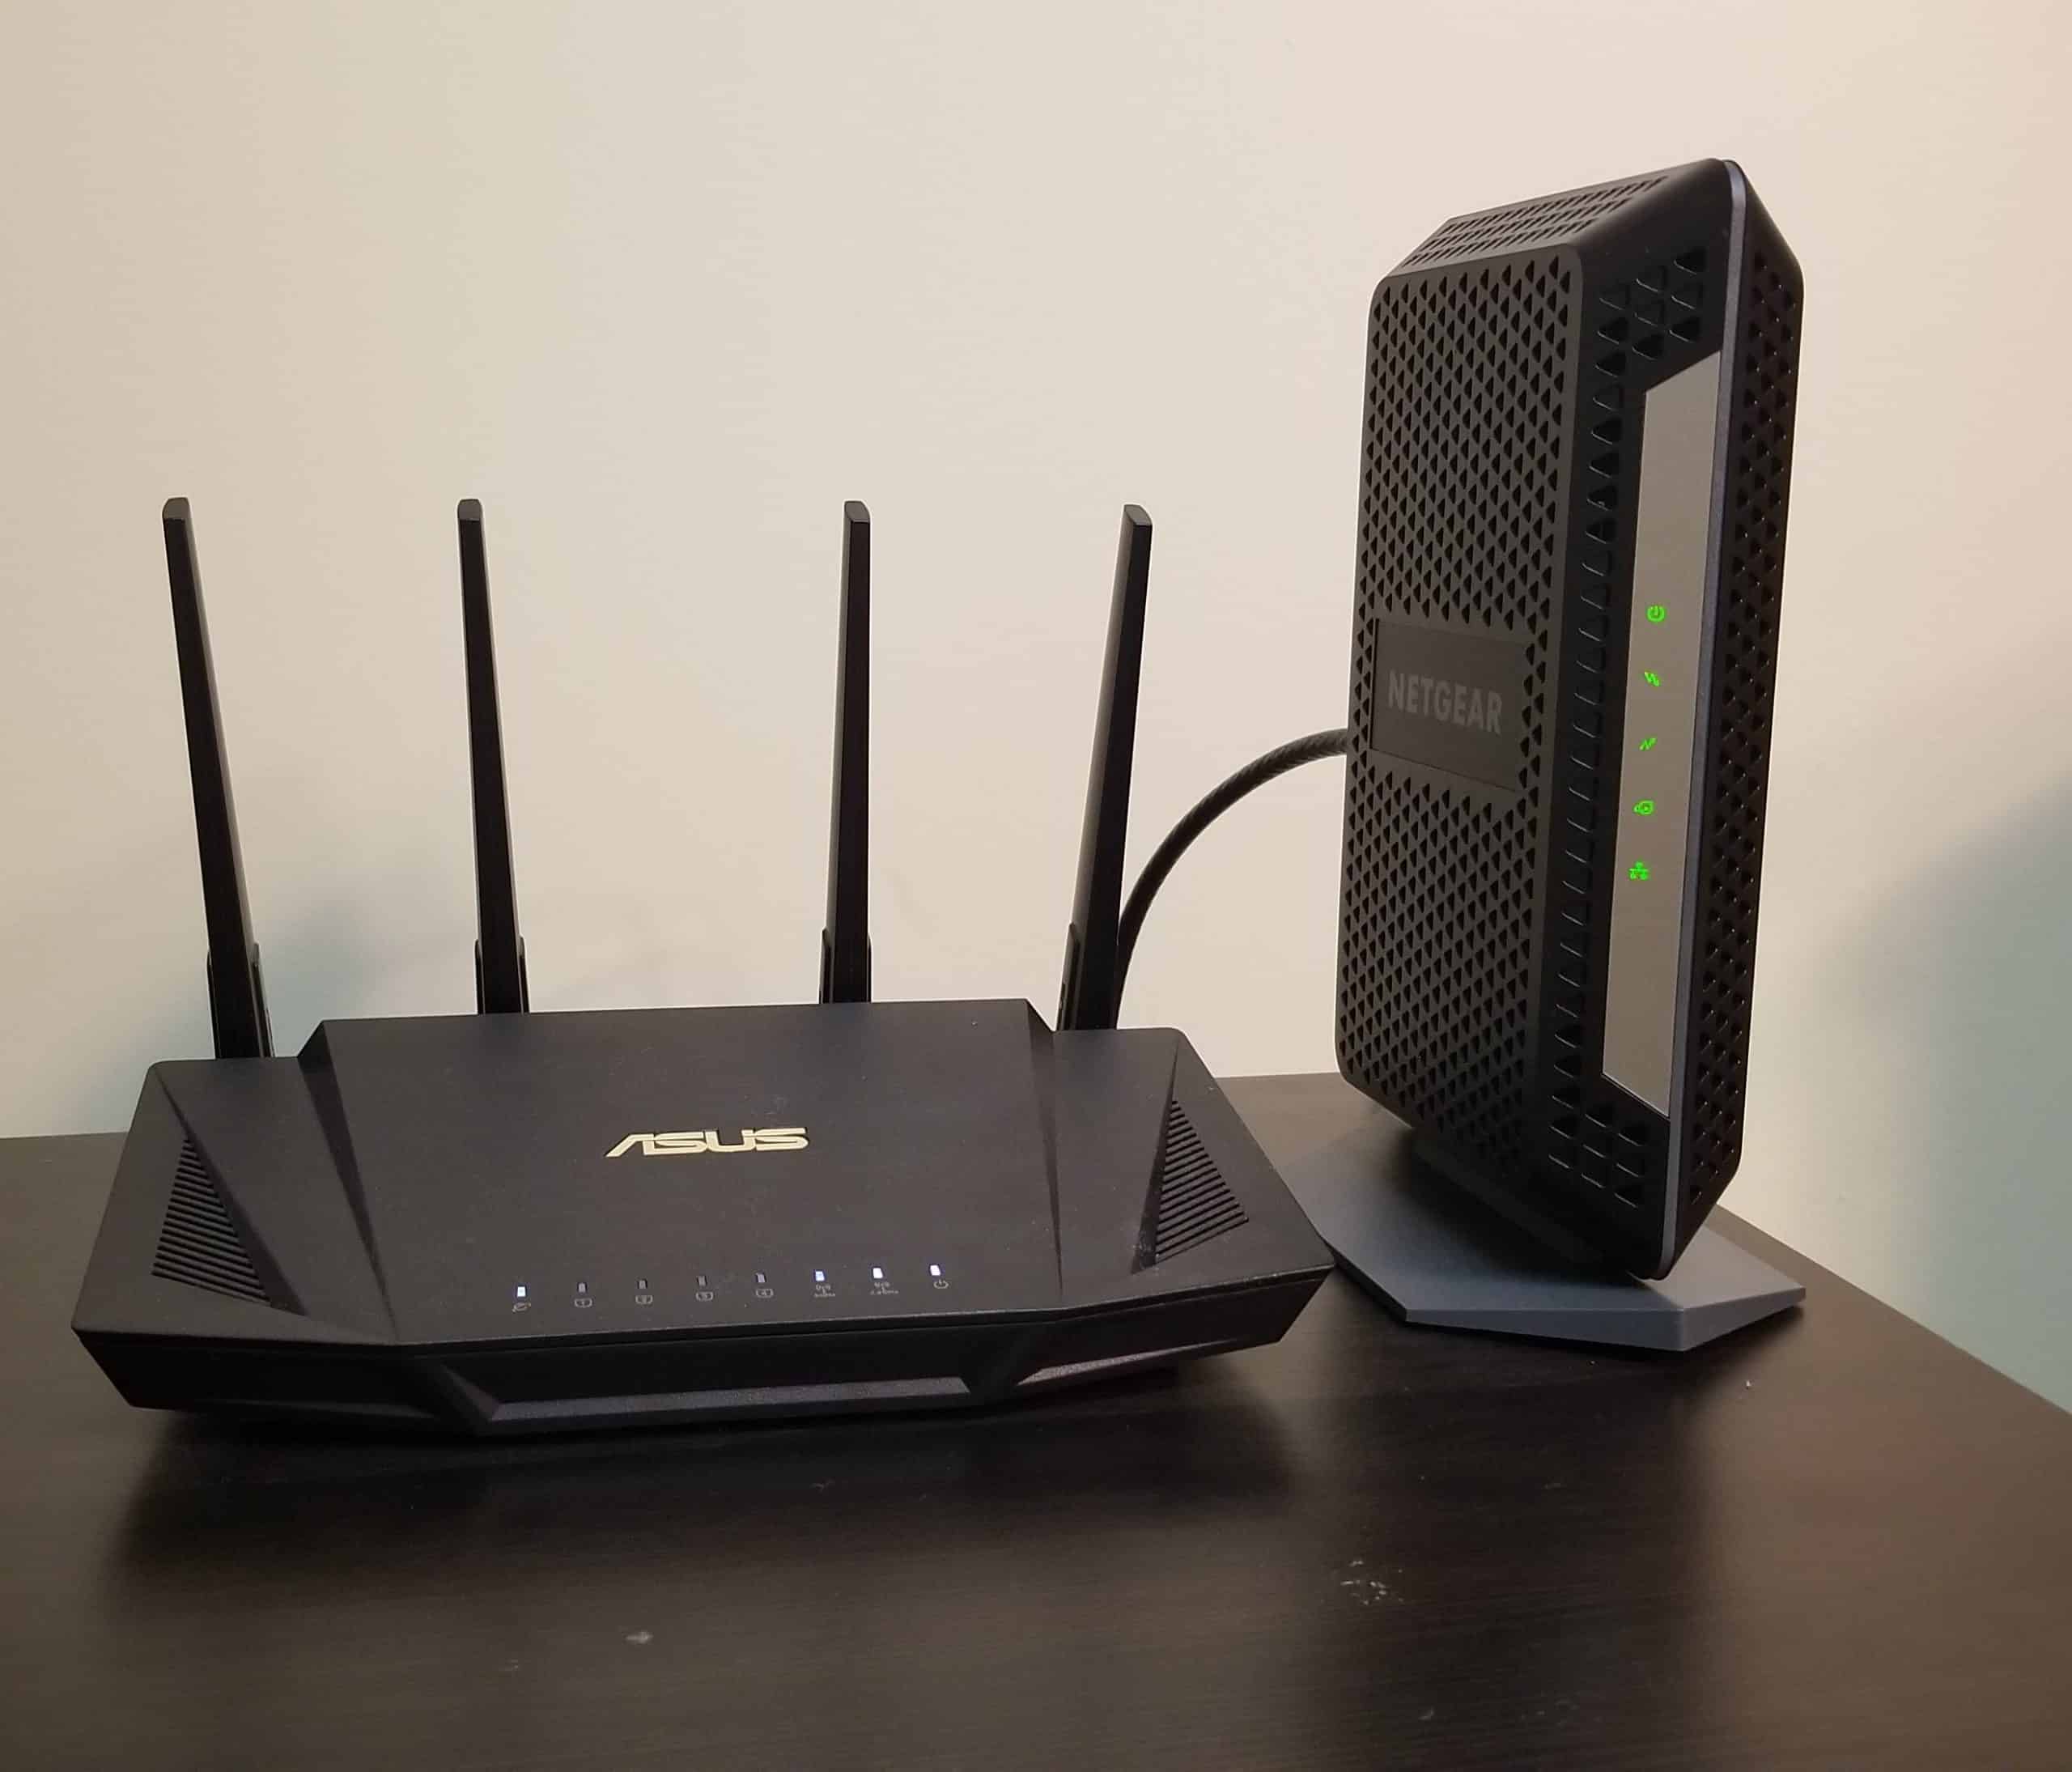 Do Modems Have WiFi? A helpful, illustrated guide.